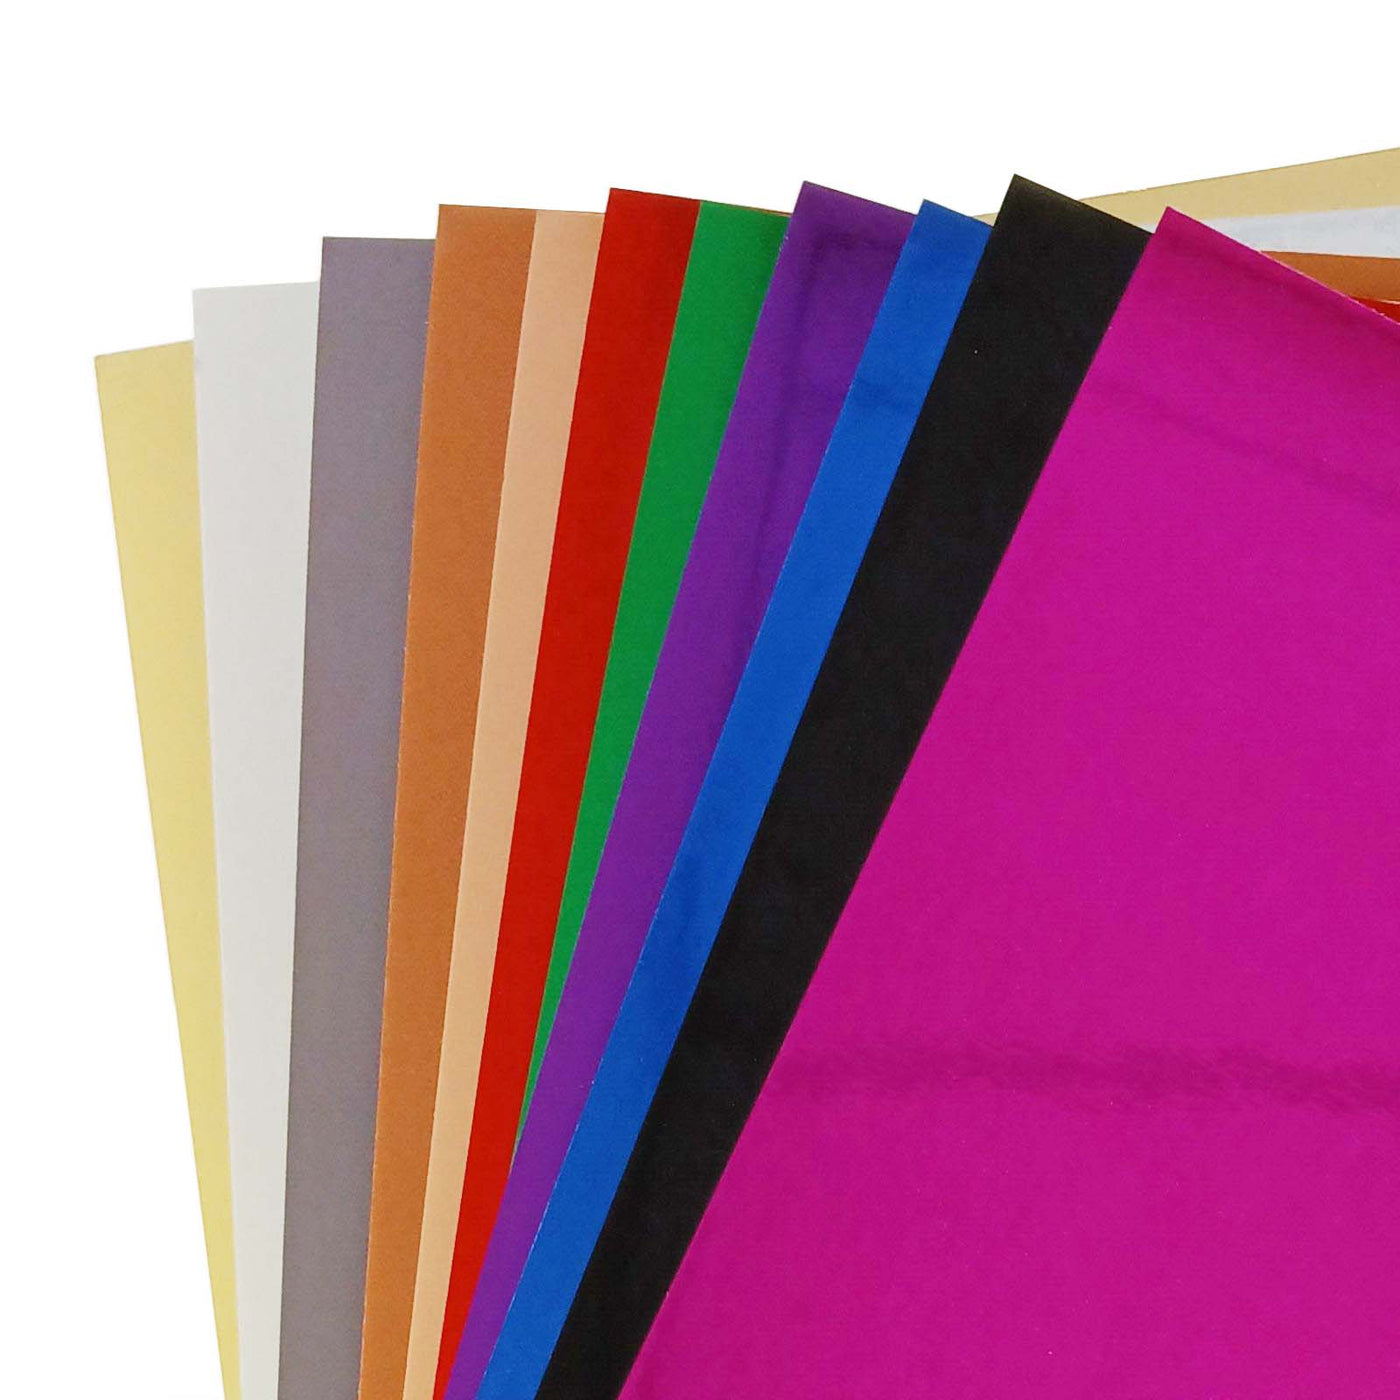 Mirri H Foil Board - Complete collection of 10 colors in 12x12 sheets